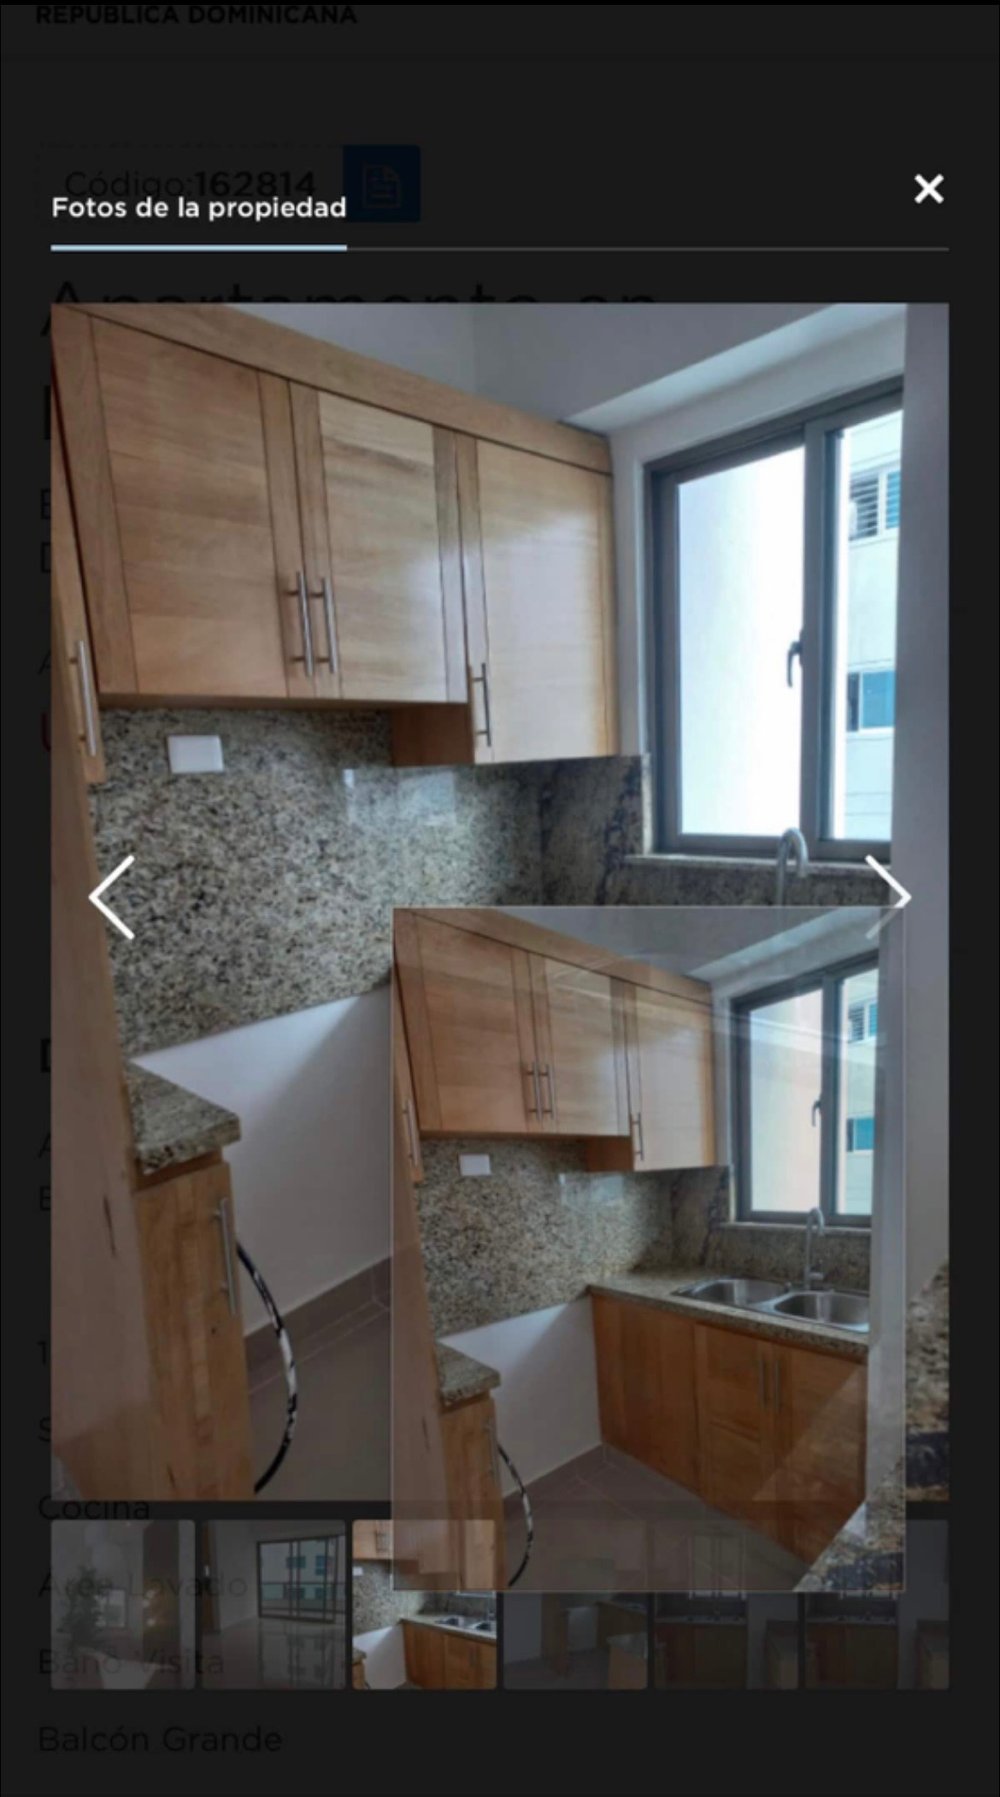  Now this looks like the host uploaded a screenshot they accidentally took while making the listing. Again it’s the attention to detail (or lack there of) for me. What will my experience be? Will the place be clean? Too much of a risk when I see this